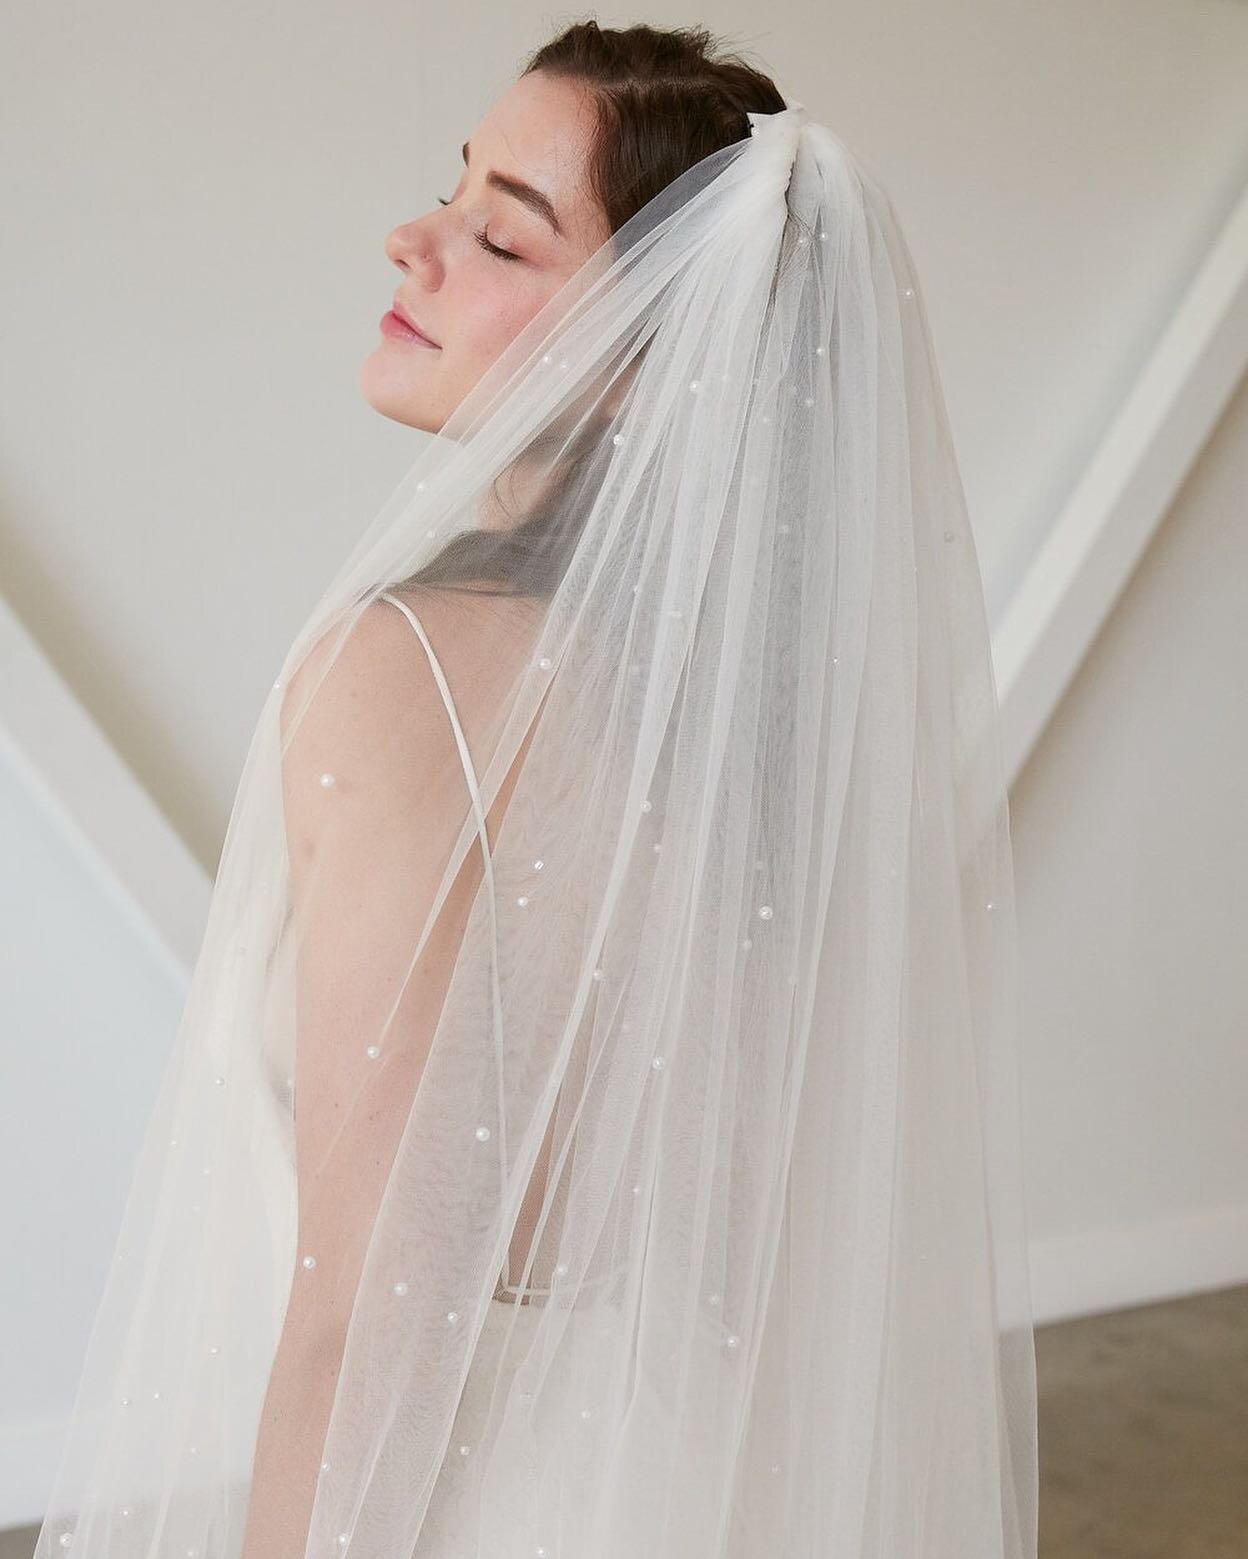 The only thing better than a pearl veil is a pearl veil with sleeves! This soft tulle veil is bringing all of the drama, from its balloon sleeves to its scattered pearl embellishments. This modern accessory is a fun addition to any wedding gown and a